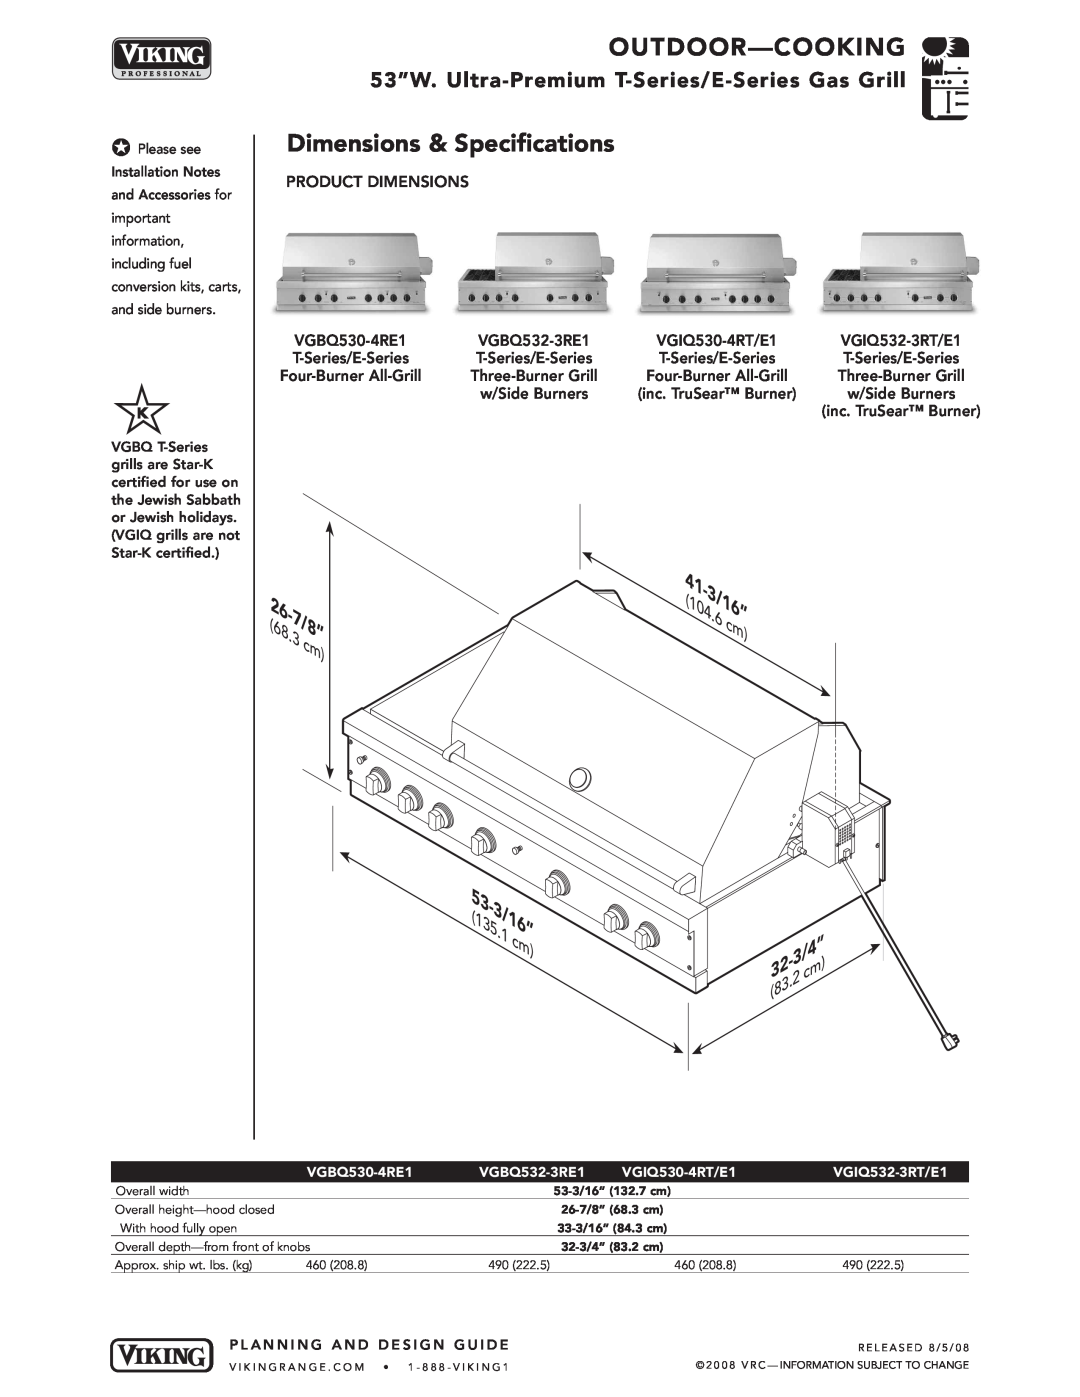 Viking VGBQ manual Dimensions & Specifications, Outdoor-C Ooking, 53”W. Ultra -Pre mium T-Series/E -Se ries Gas Grill 